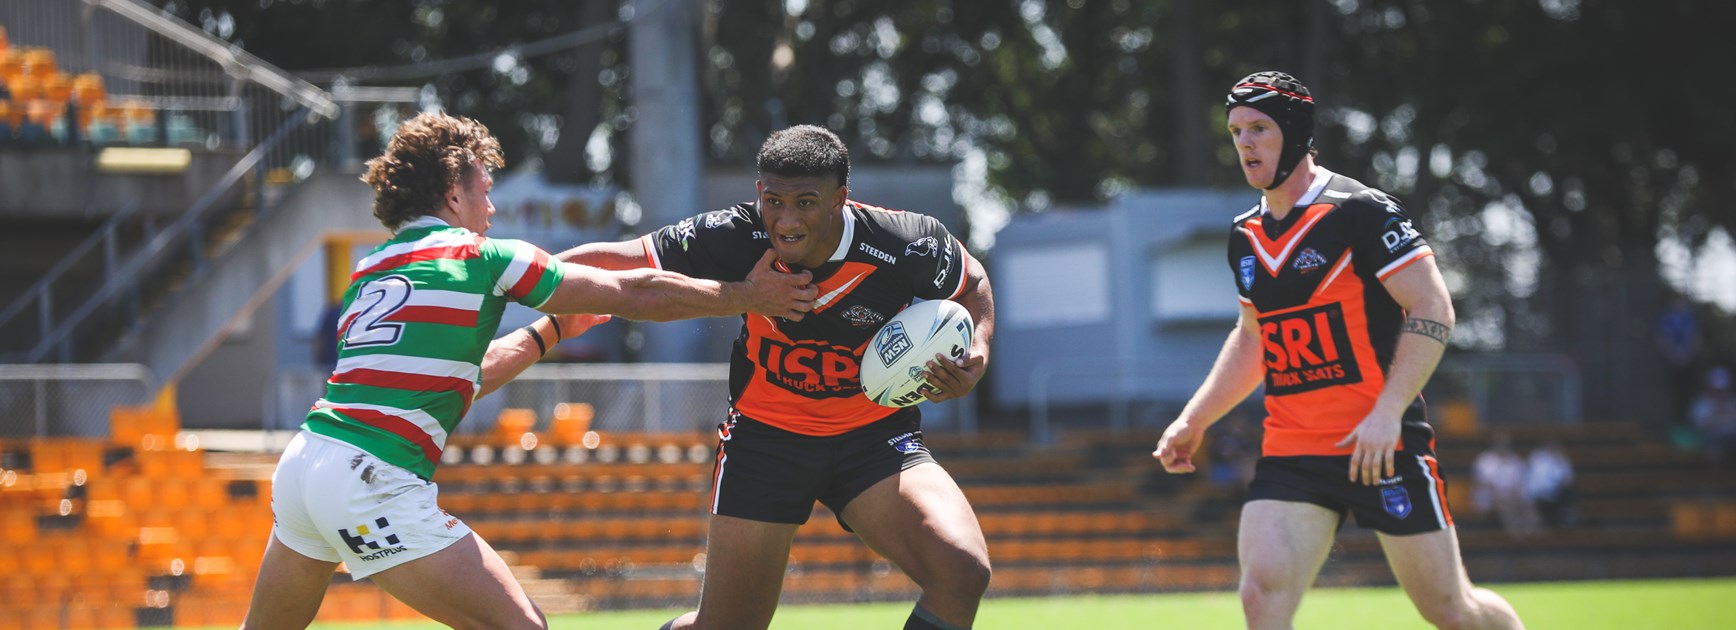 Wests Tigers Jersey Flegg team aiming to remain perfect